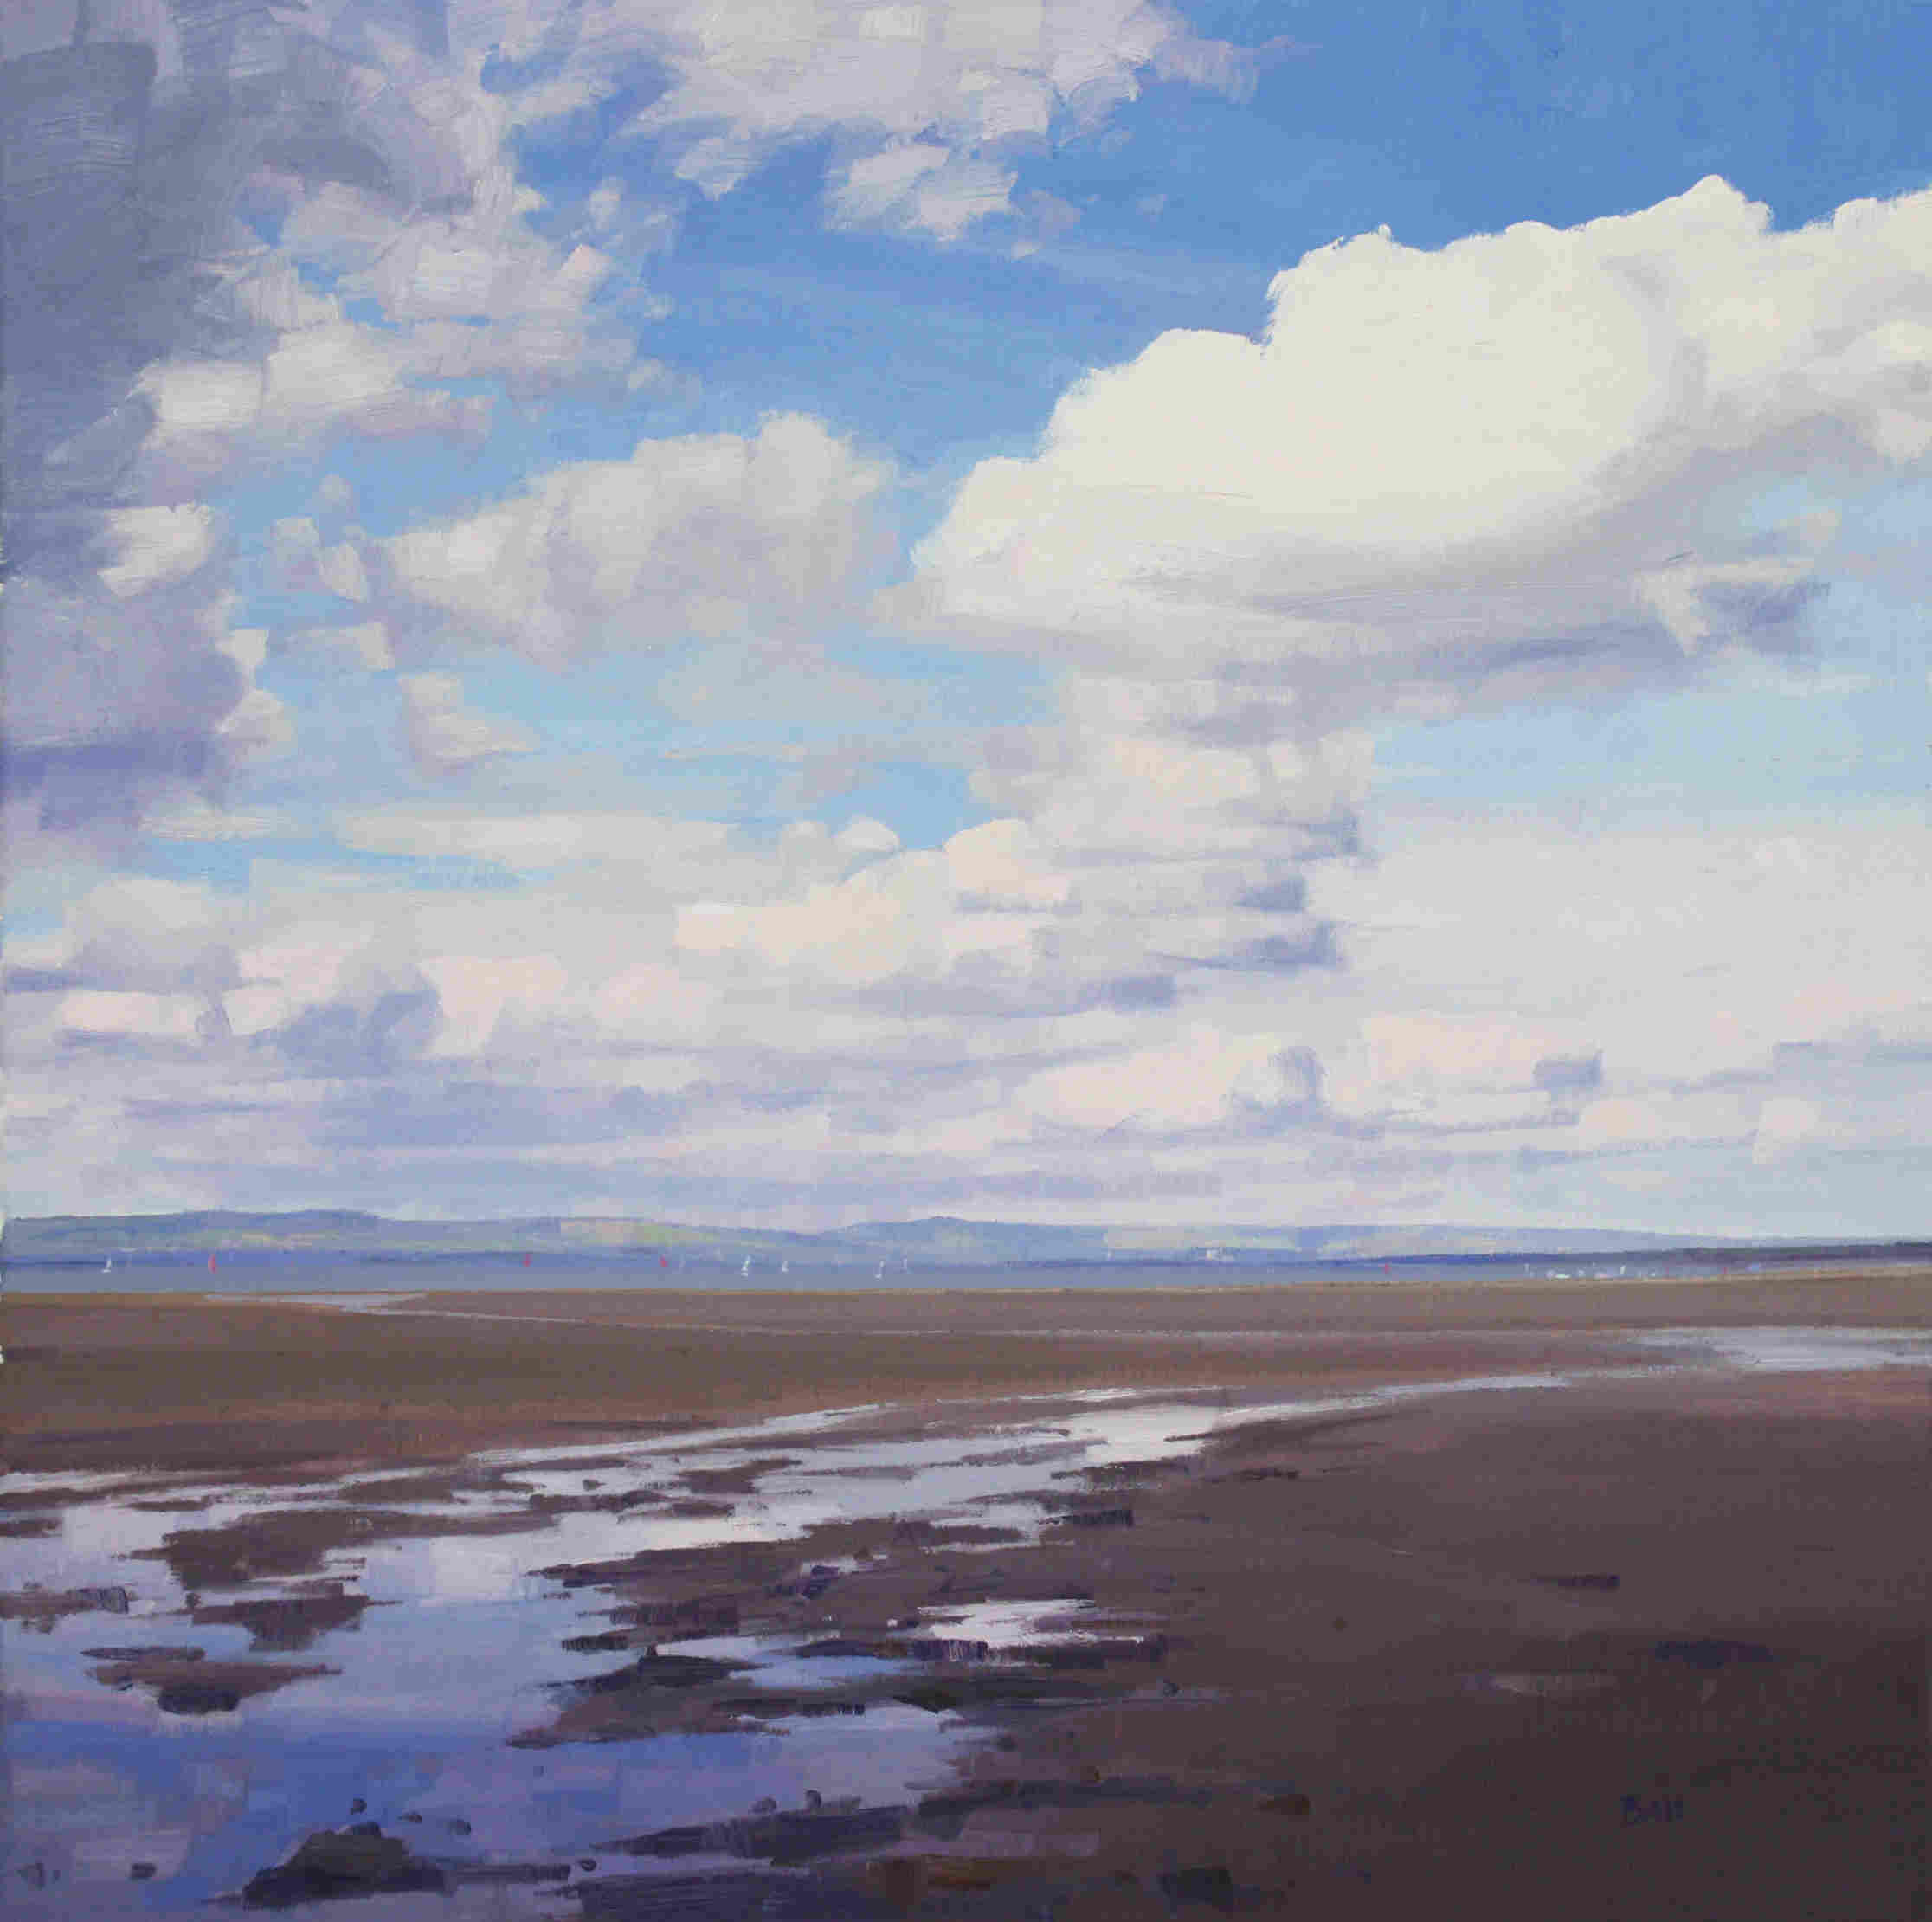 'Passing Cloud North of Troon' by artist John Bell